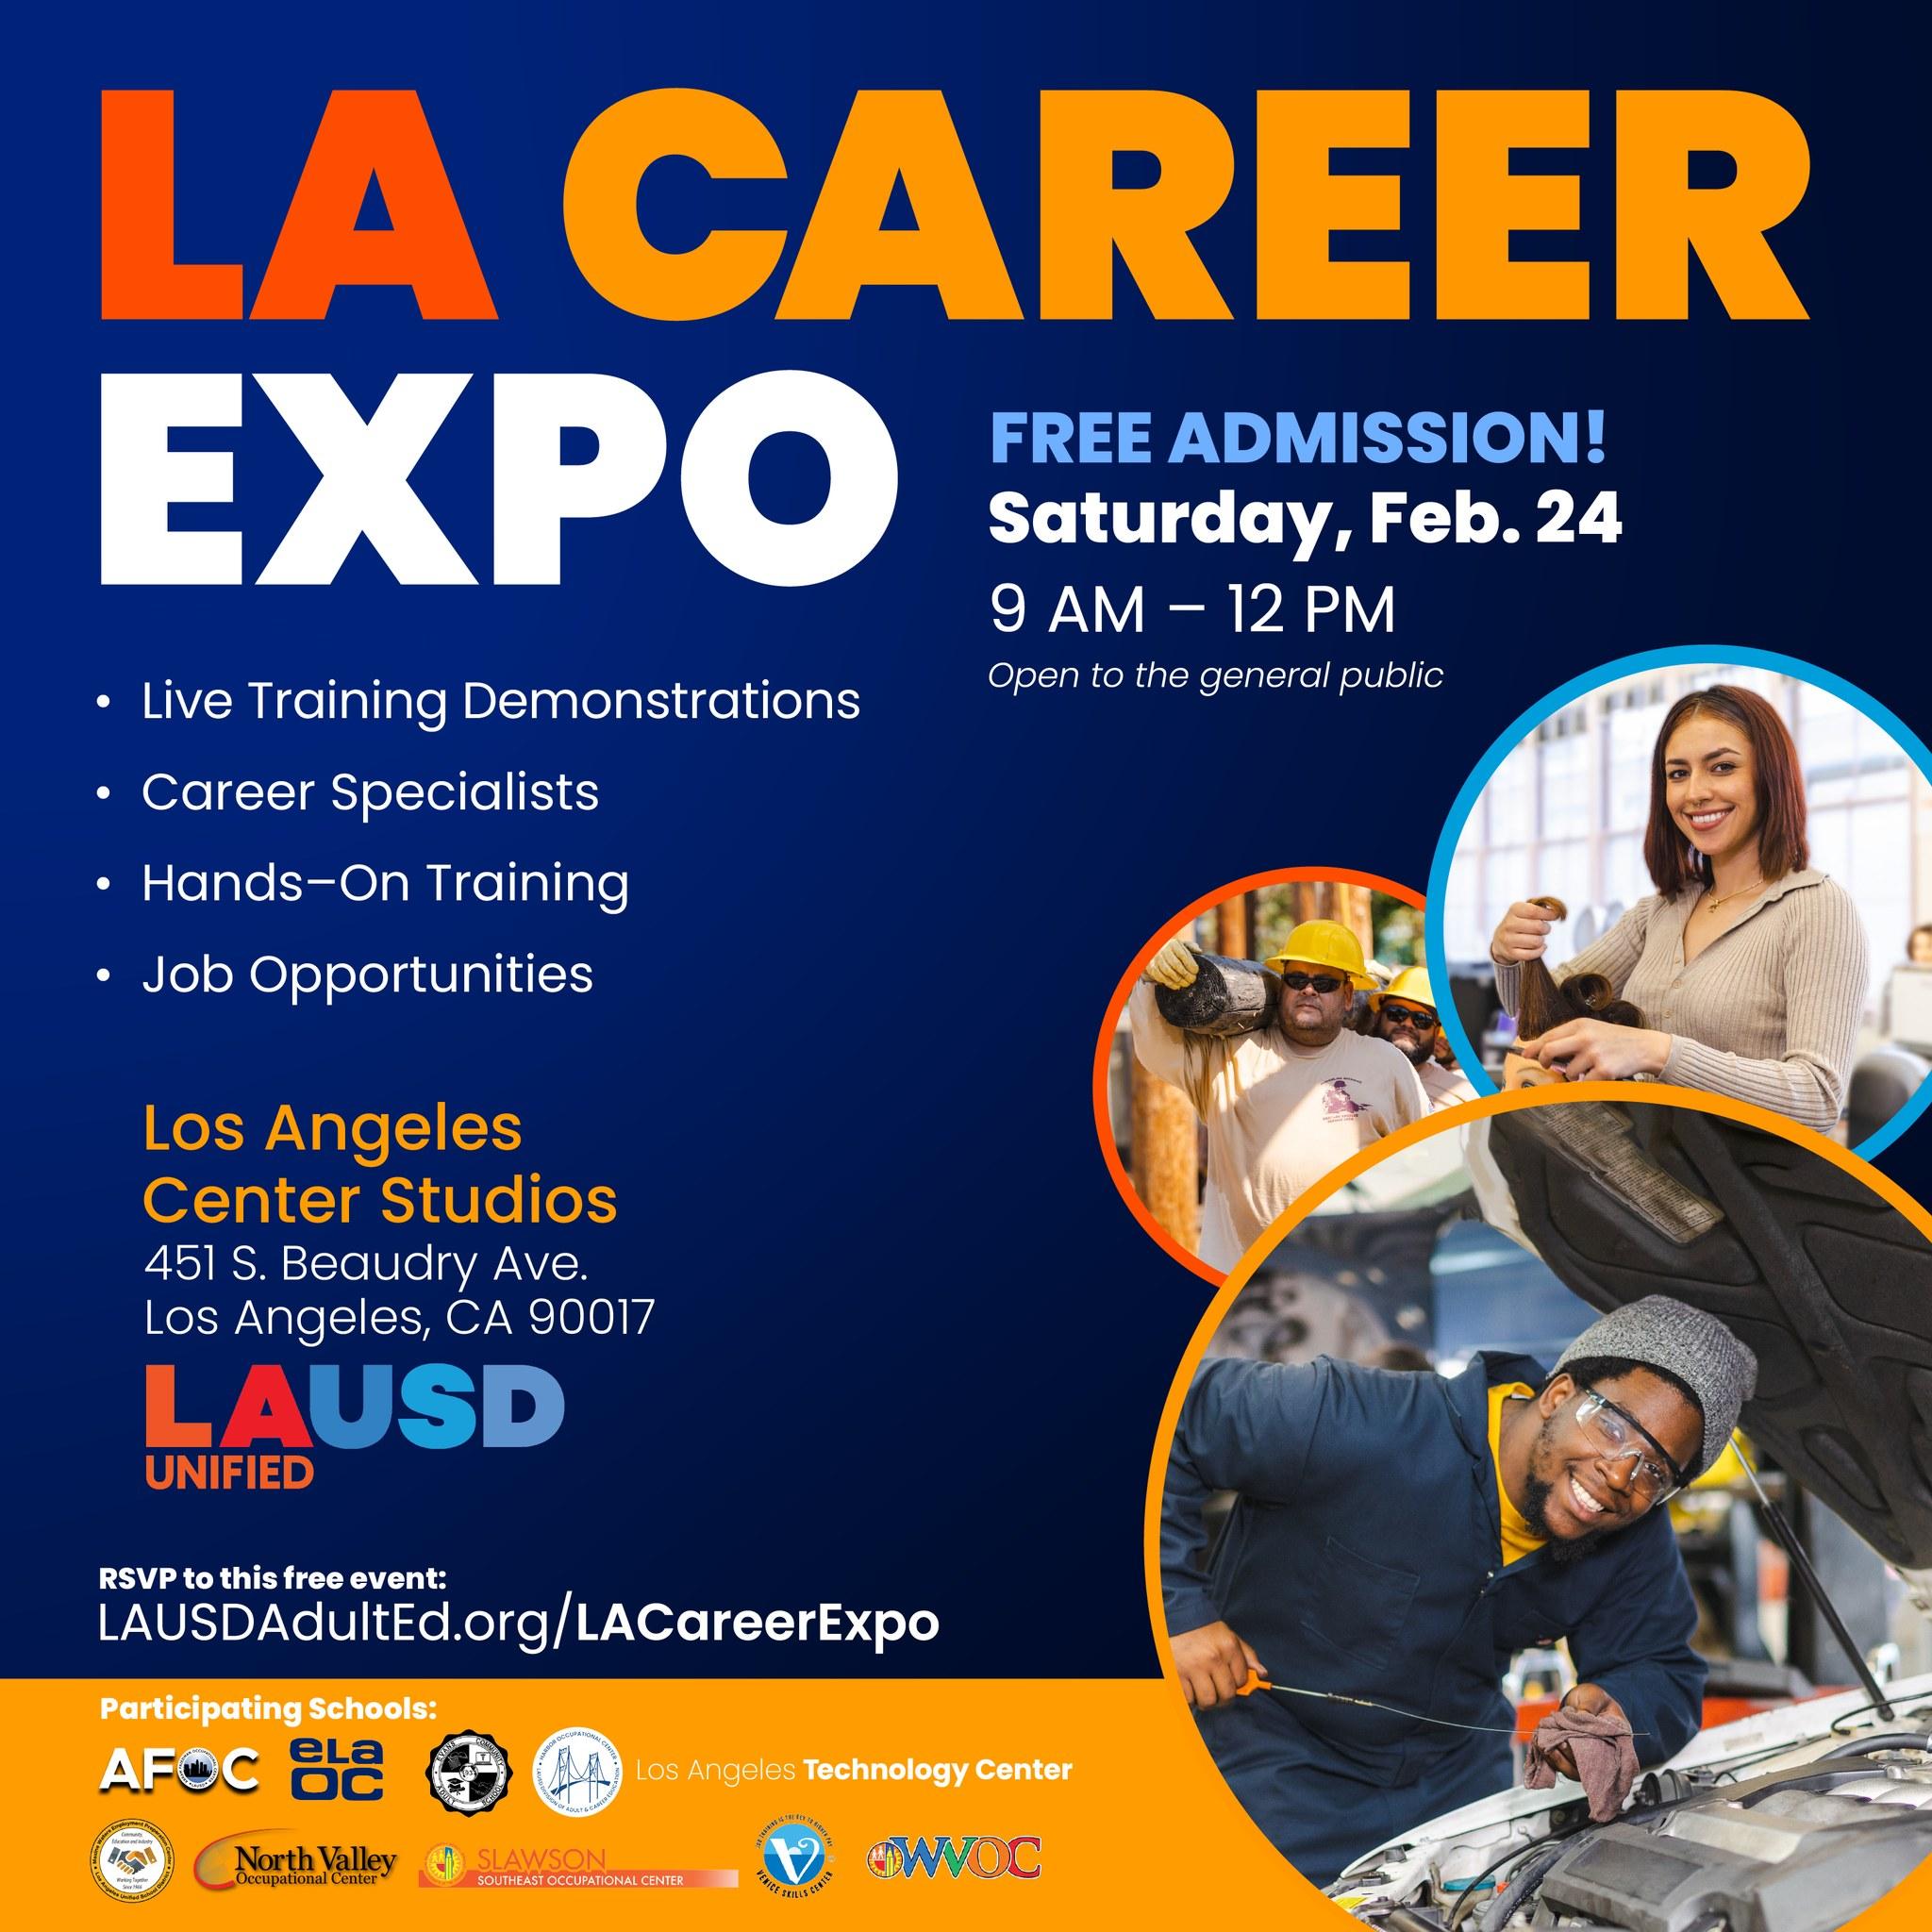 flier for LA Career Expo with same text as described in the announcement with pictures of 3 different jobs/careers: hairstylist, electrical line worker & auto mechanic